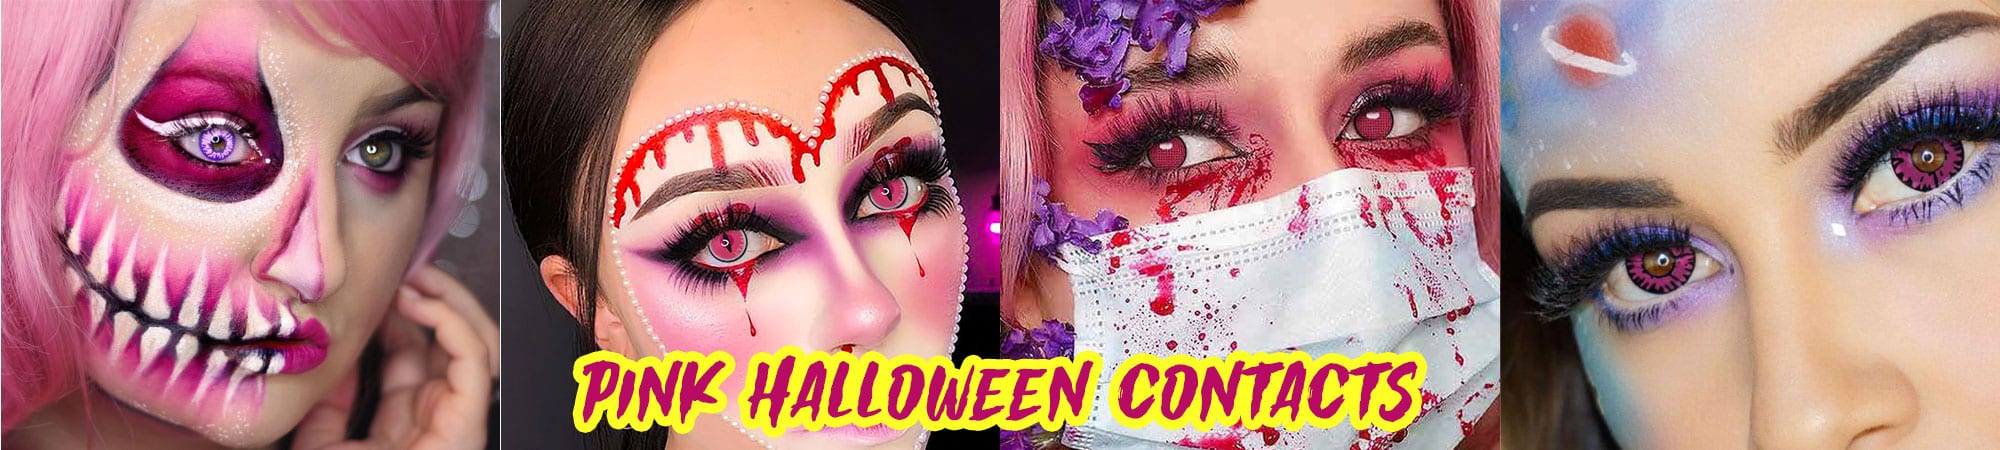 Pink Halloween Contacts